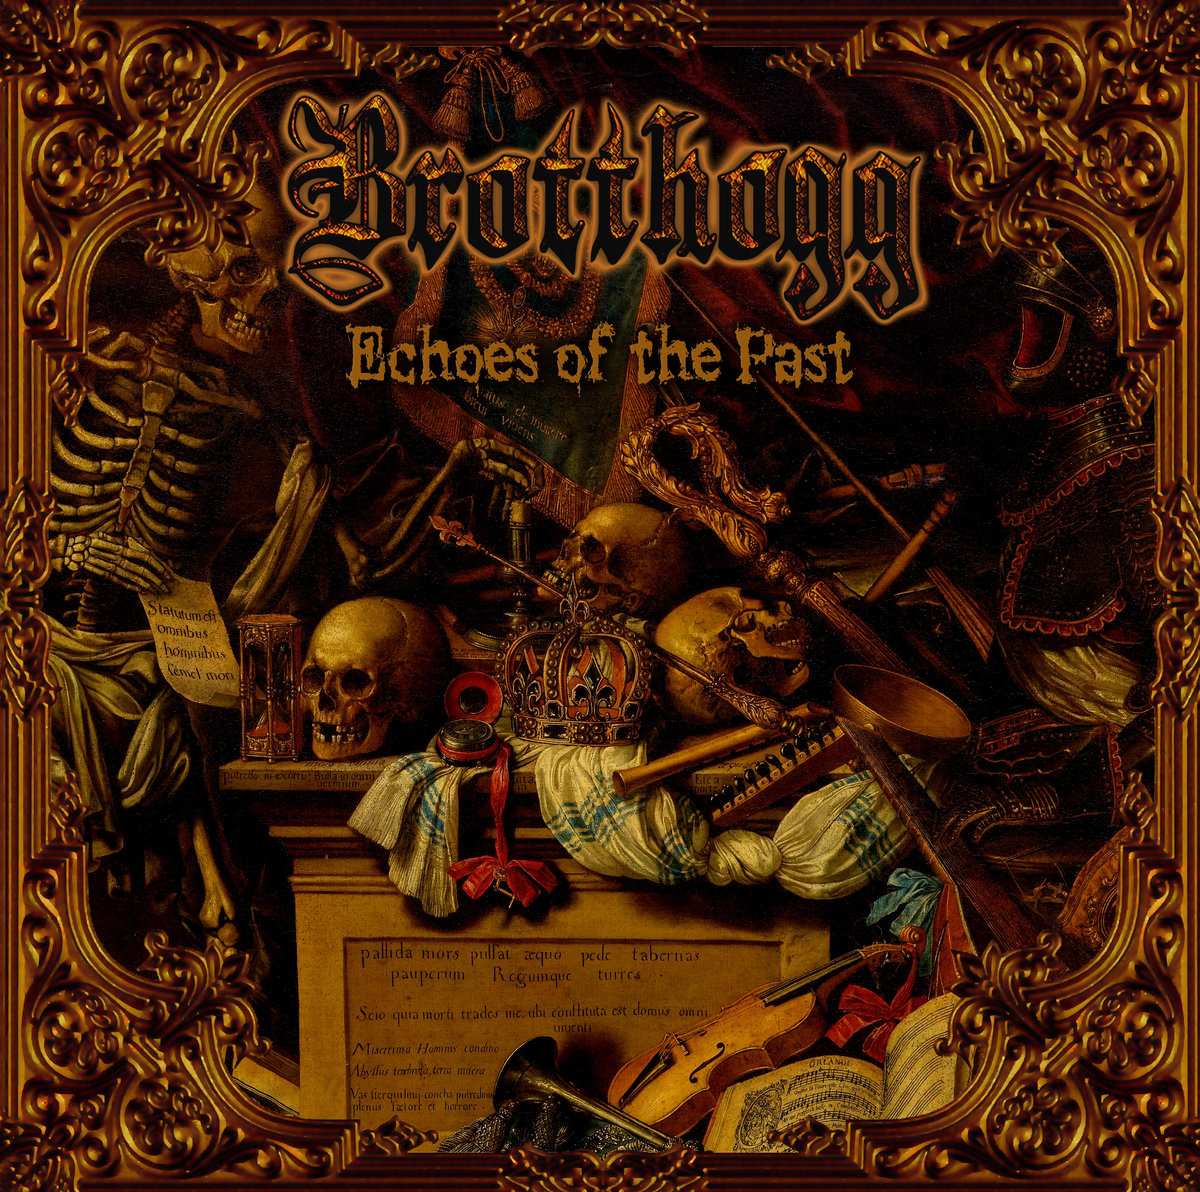 BROTTHOGG – Echoes of the Past